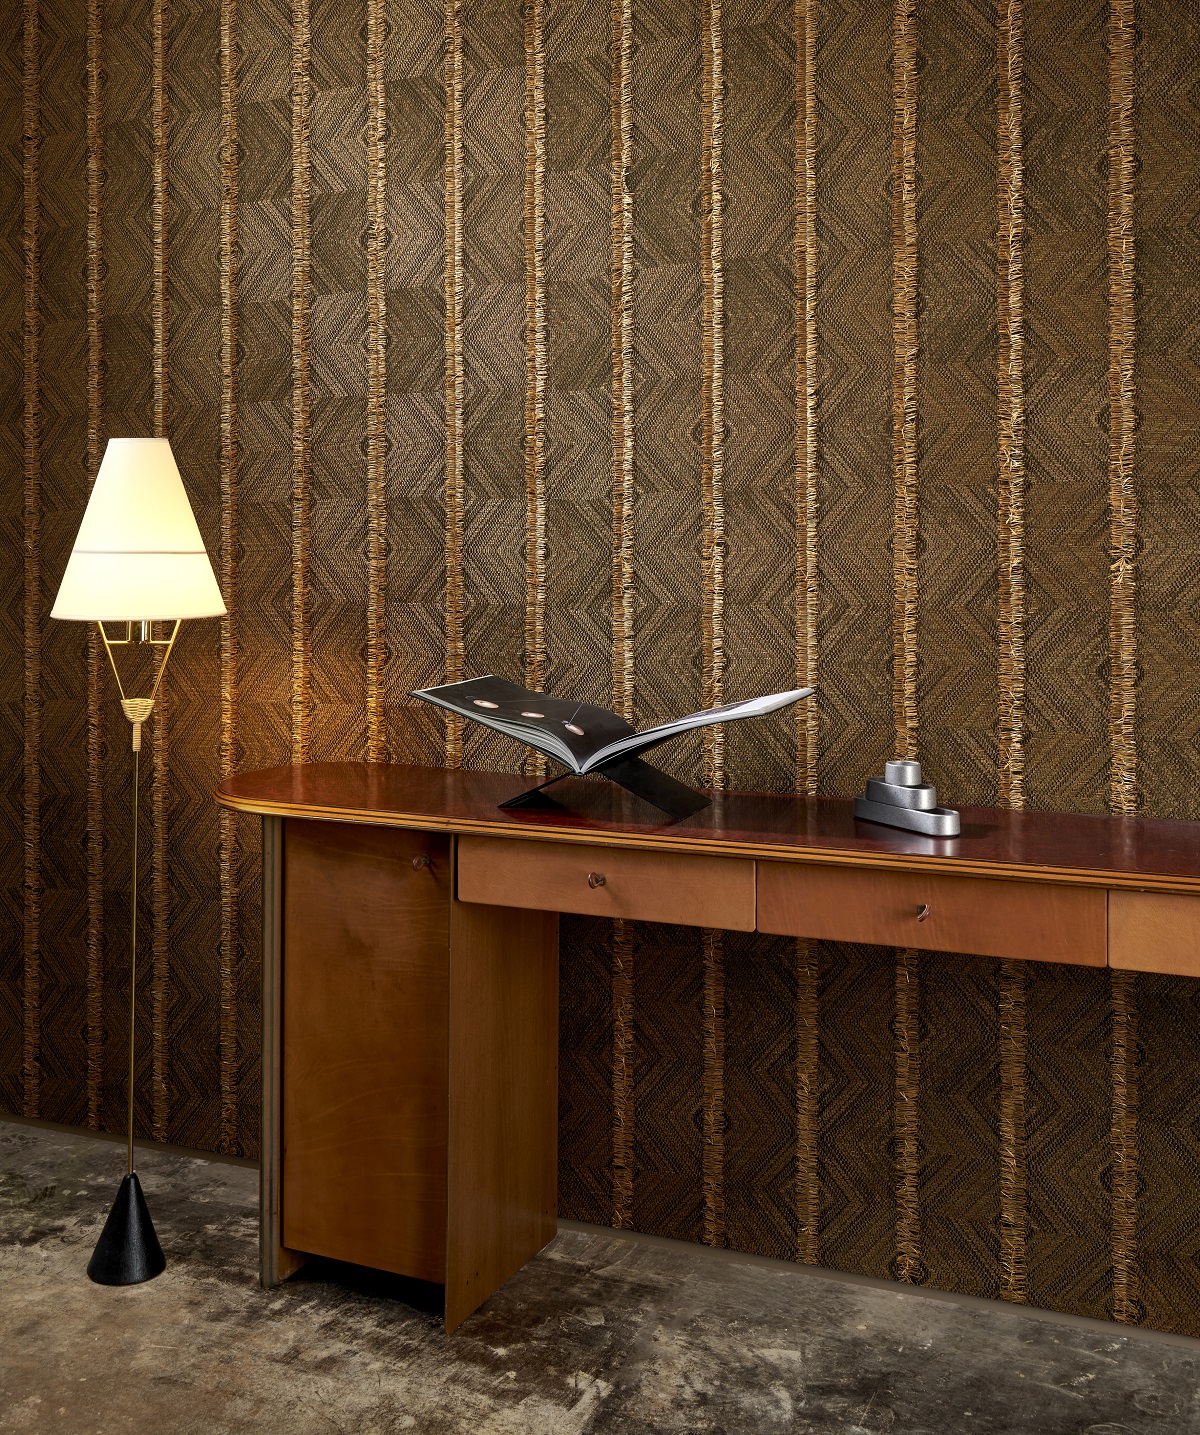 wooden table and standing lamp in front of textured fabric wallcovering from Arte